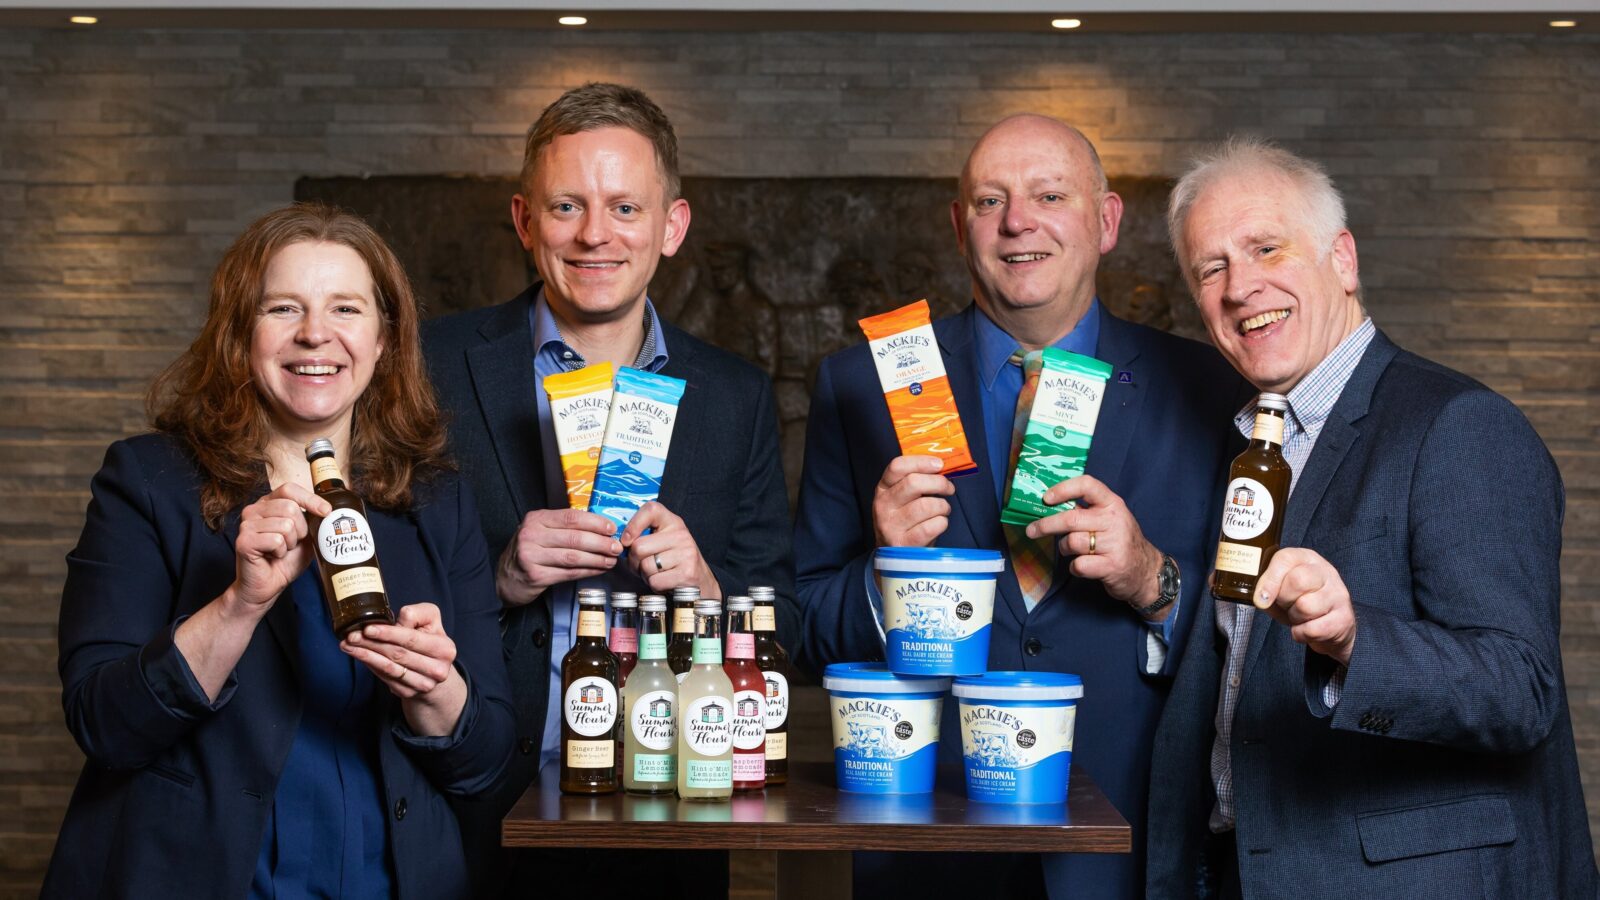 ) Claire Rennie of Summerhouse Drinks, Stuart Common of Mackie’s of Scotland, Alistair Reid from Aberdeenshire Council and Peter Cook of Opportunity North East are encouraging food and drink manufacturers and producers to maximise the market development opportunities in the revamped North East Scotland Food & Drink Awards.